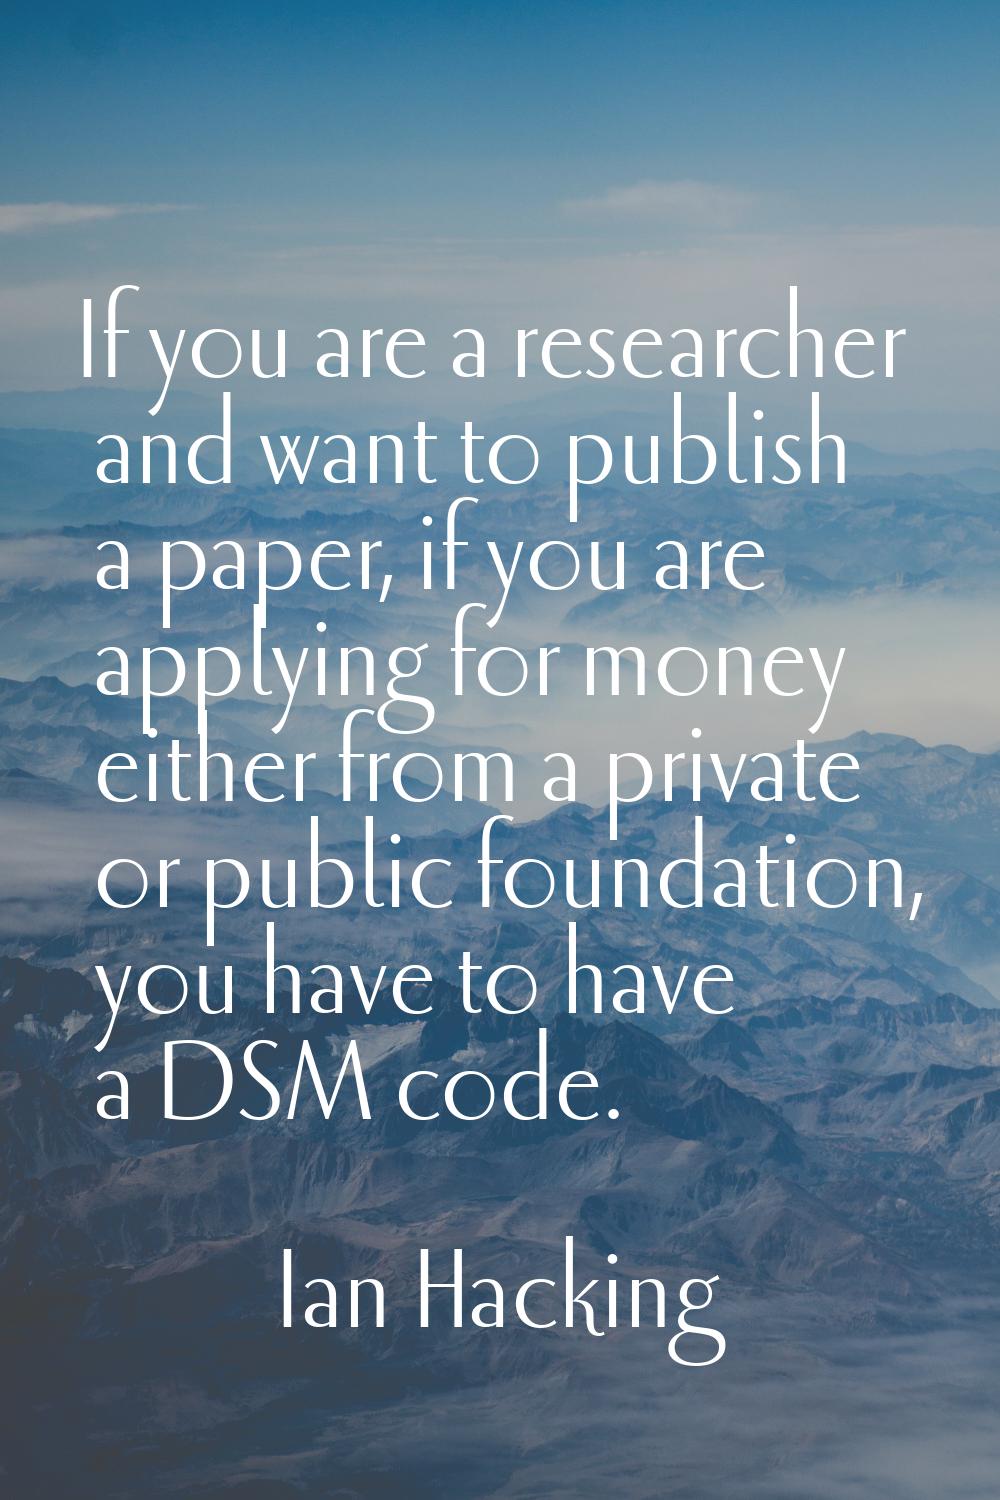 If you are a researcher and want to publish a paper, if you are applying for money either from a pr